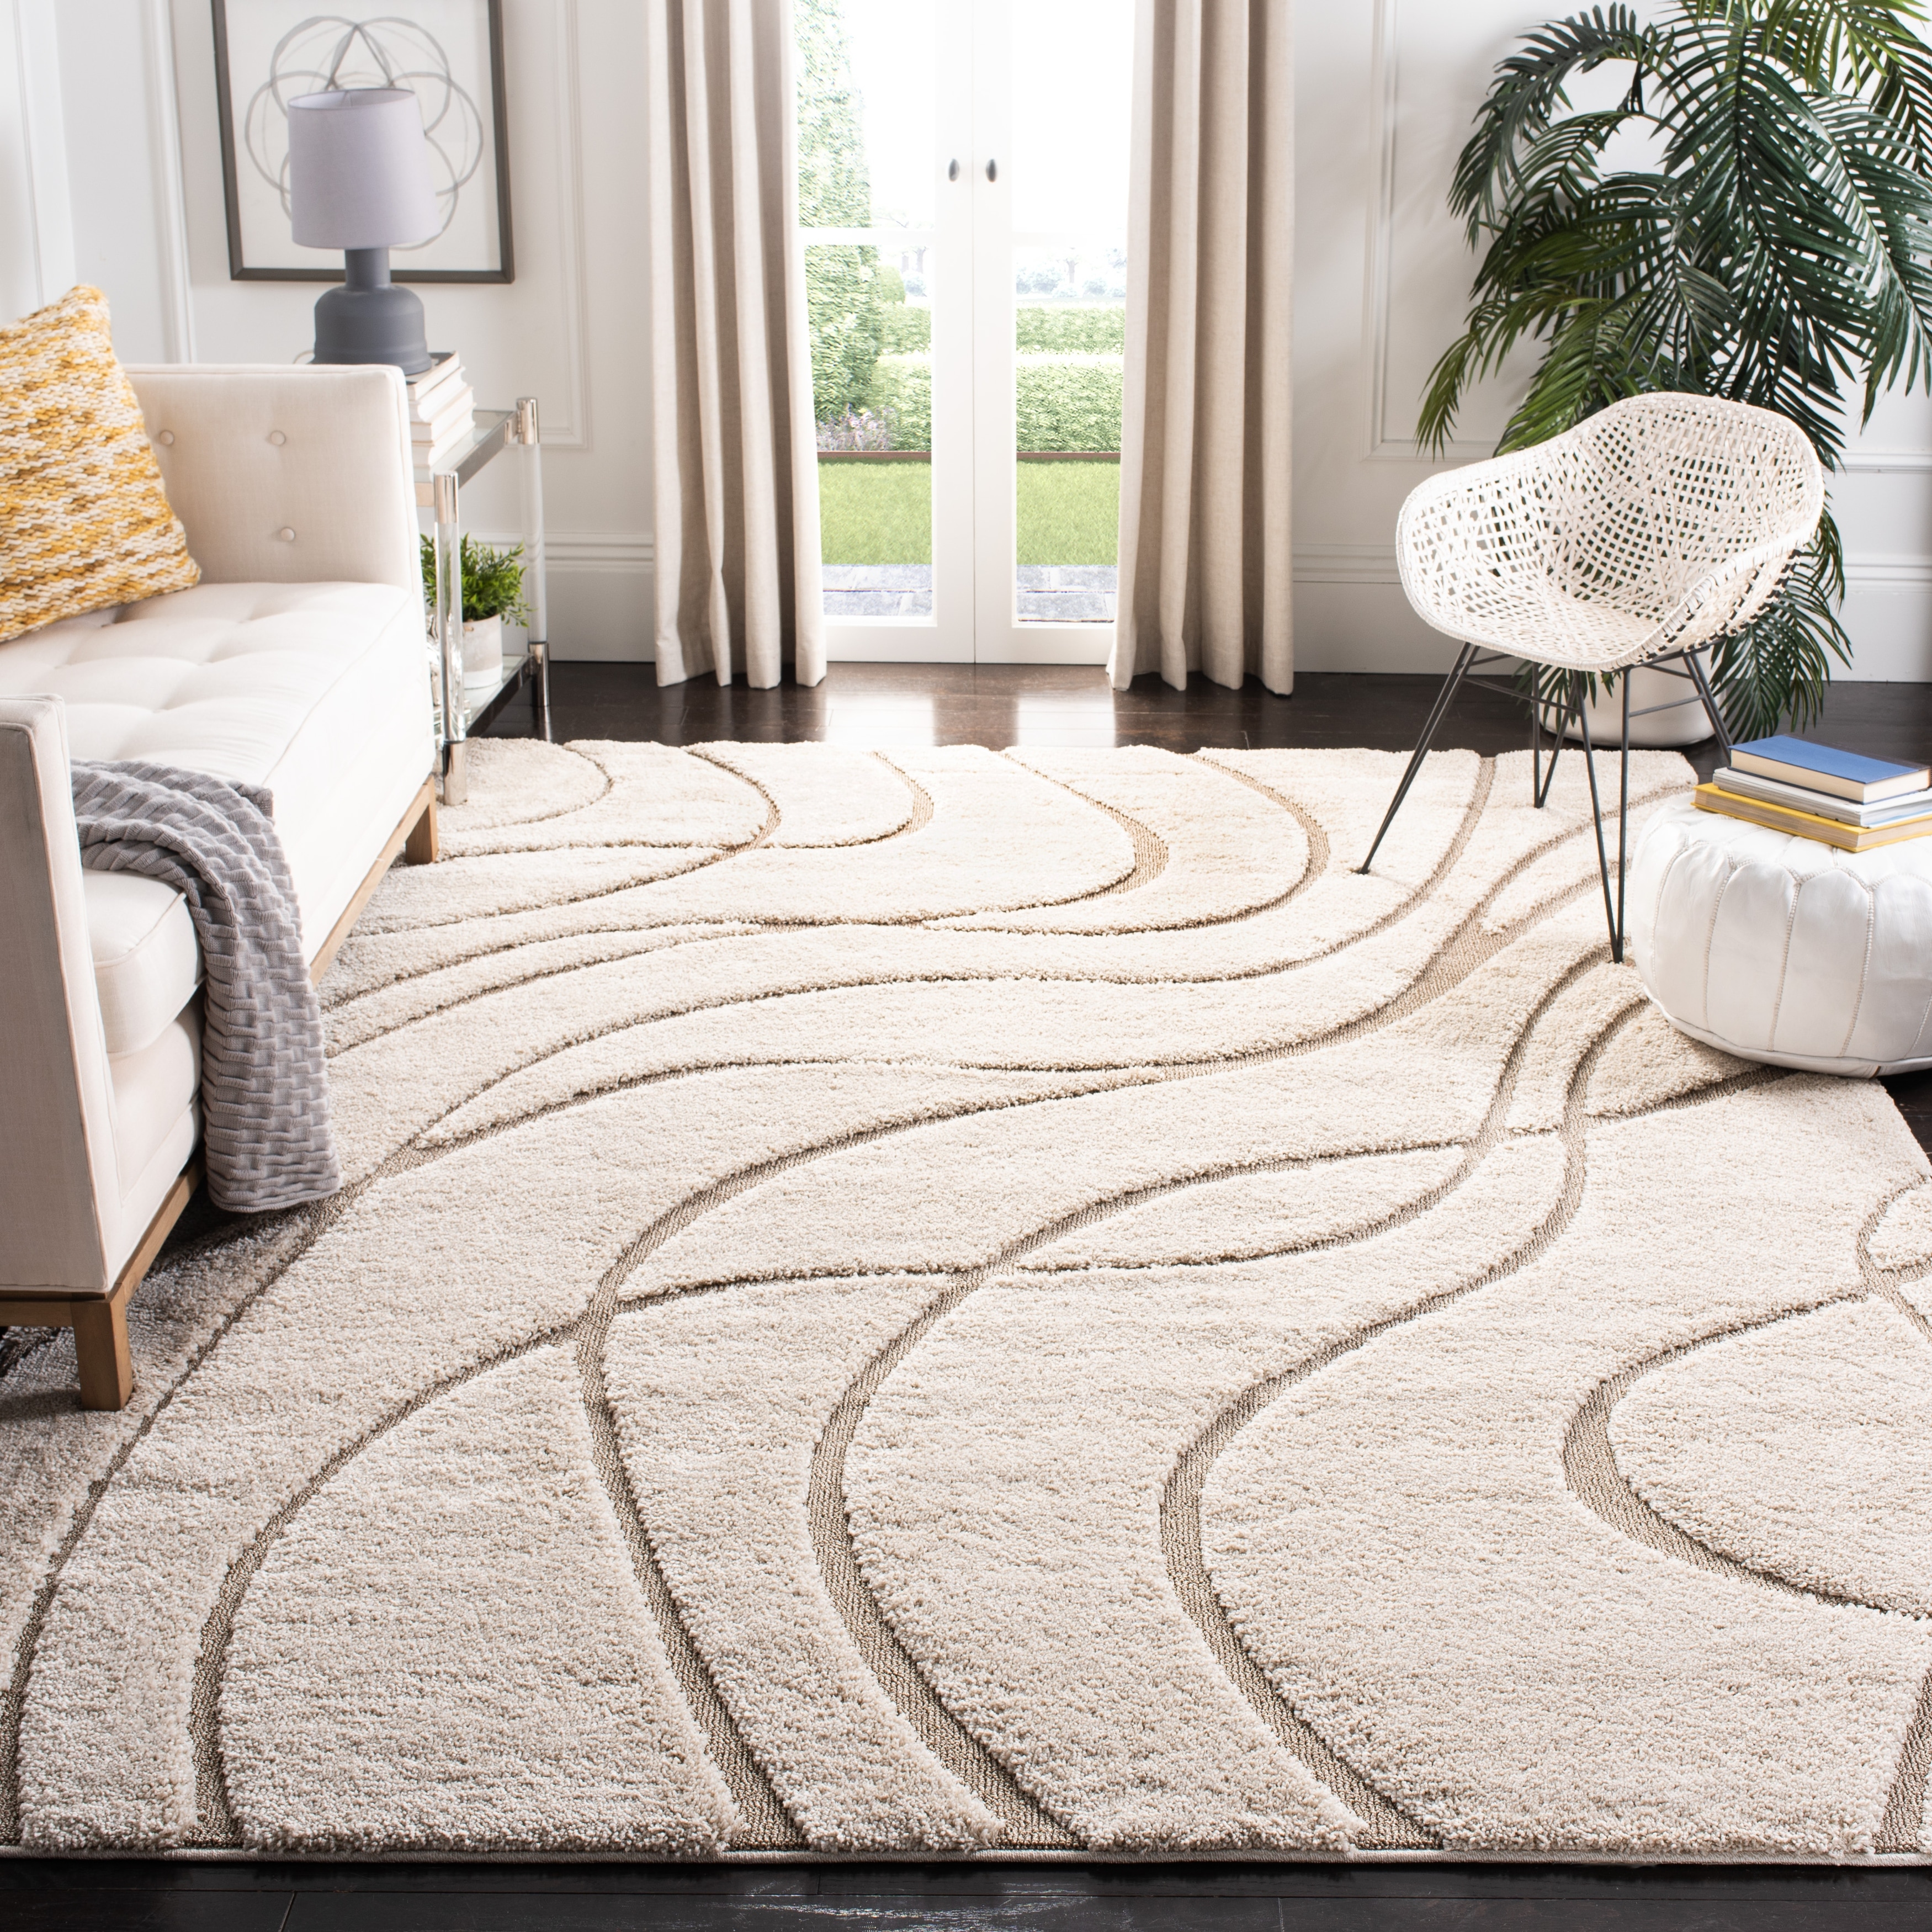 NEW Modern Swing Wave Pattern Rug Carpet Small Extra Large Bedroom Living Room 